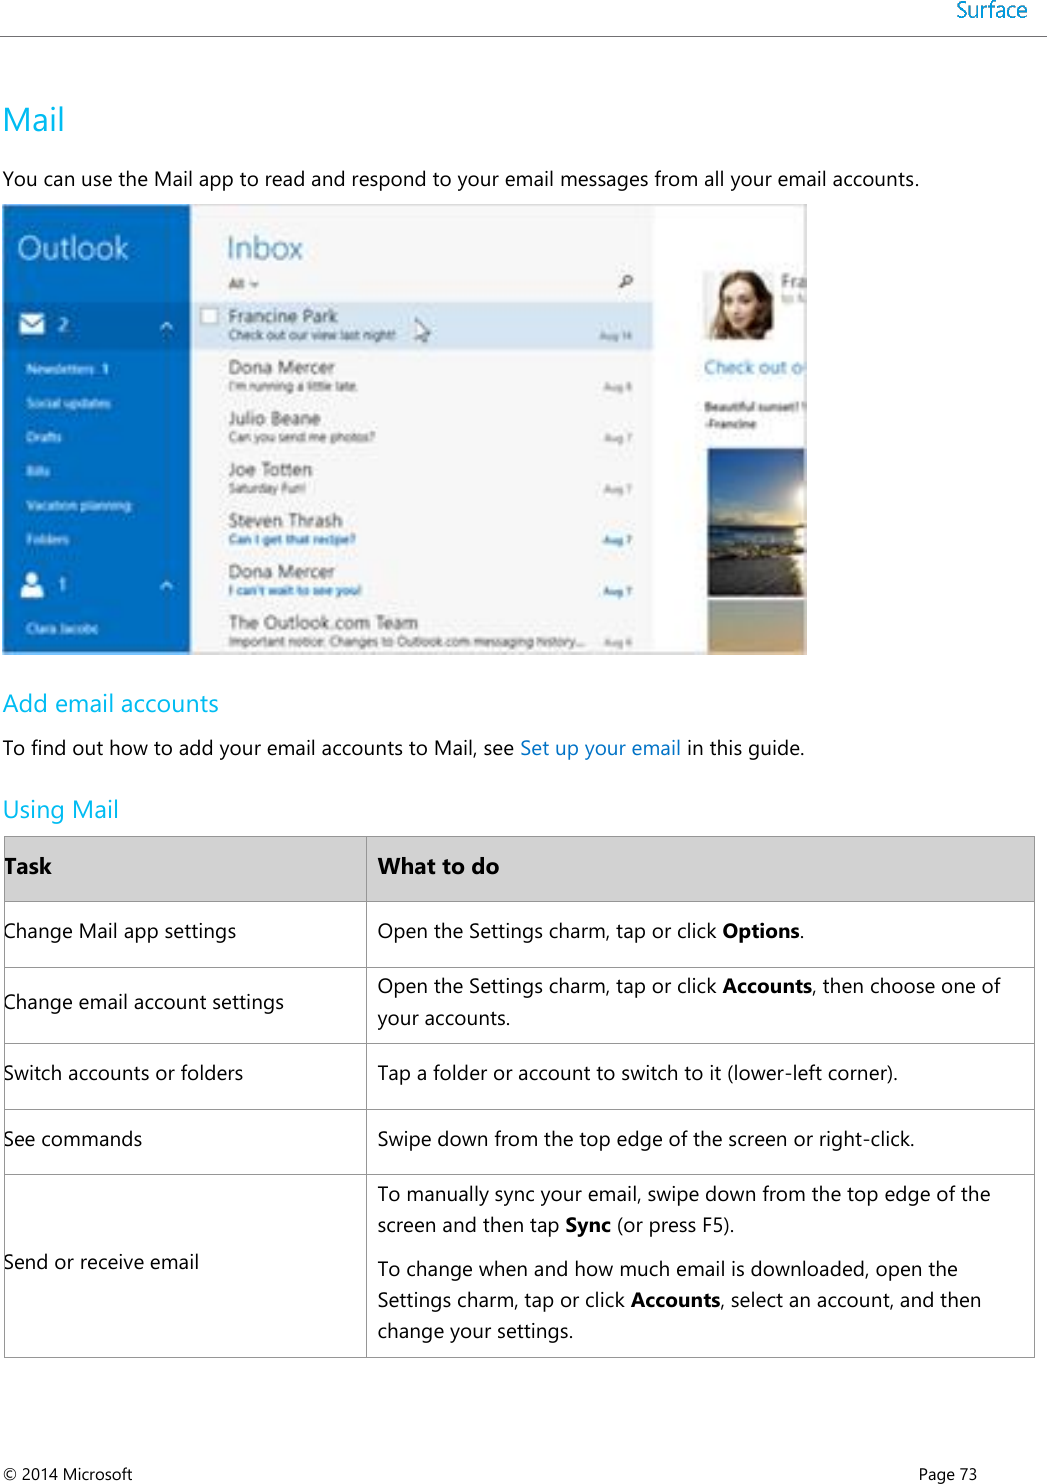  © 2014 Microsoft      Page 73  Mail You can use the Mail app to read and respond to your email messages from all your email accounts.  Add email accounts To find out how to add your email accounts to Mail, see Set up your email in this guide.  Using Mail Task What to do Change Mail app settings Open the Settings charm, tap or click Options. Change email account settings Open the Settings charm, tap or click Accounts, then choose one of your accounts. Switch accounts or folders Tap a folder or account to switch to it (lower-left corner). See commands Swipe down from the top edge of the screen or right-click. Send or receive email To manually sync your email, swipe down from the top edge of the screen and then tap Sync (or press F5).  To change when and how much email is downloaded, open the Settings charm, tap or click Accounts, select an account, and then change your settings.  